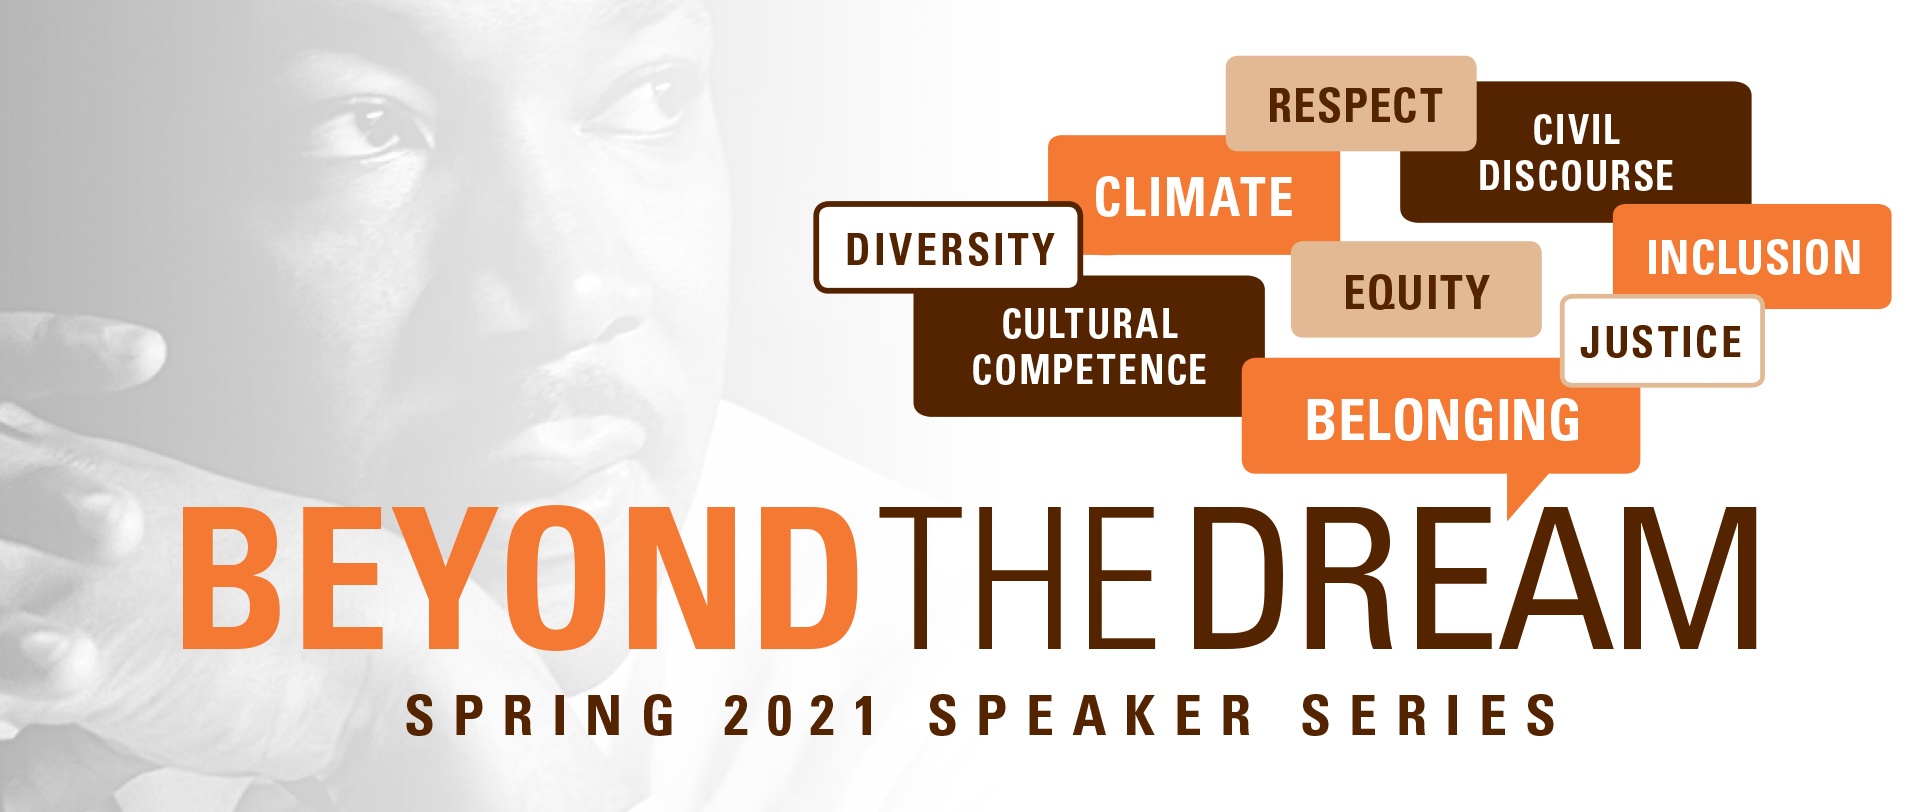 Beyond the Dream Spring 2021 speaker series about climate, diversity, cultural competence, equity, belonging, justice, inclusion, respect, and civil discourse